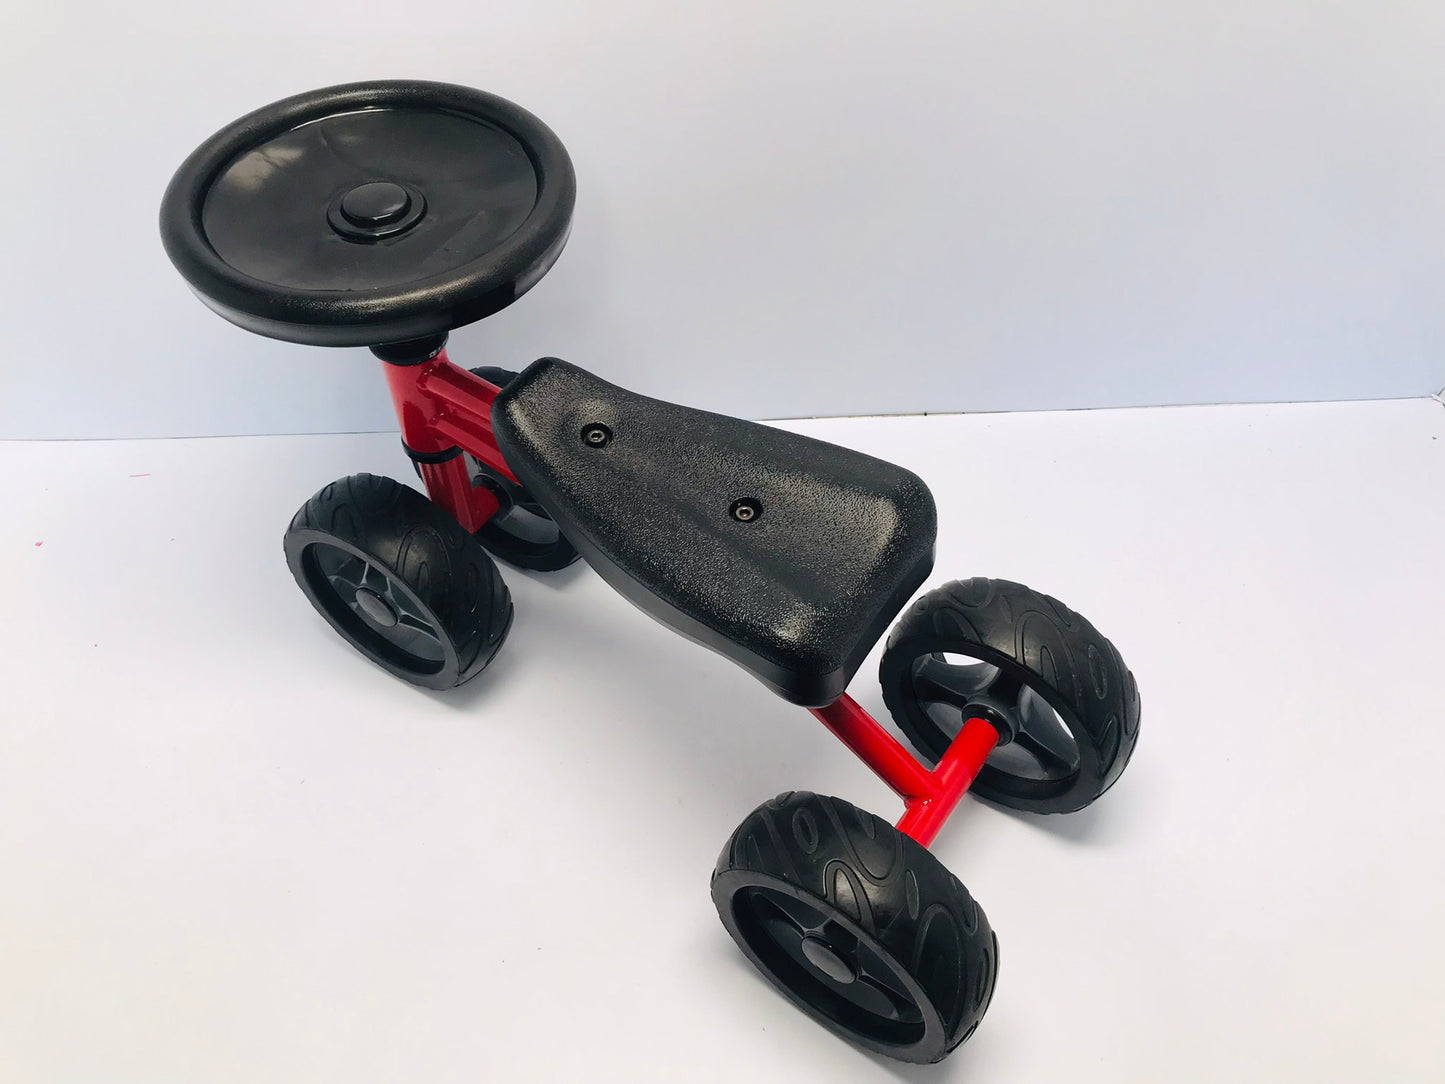 Hape Toys Ride N' Drive Scooter 4X4 Ridem Age 1-3 Fat Brain Toys Like New Outstanding Quality